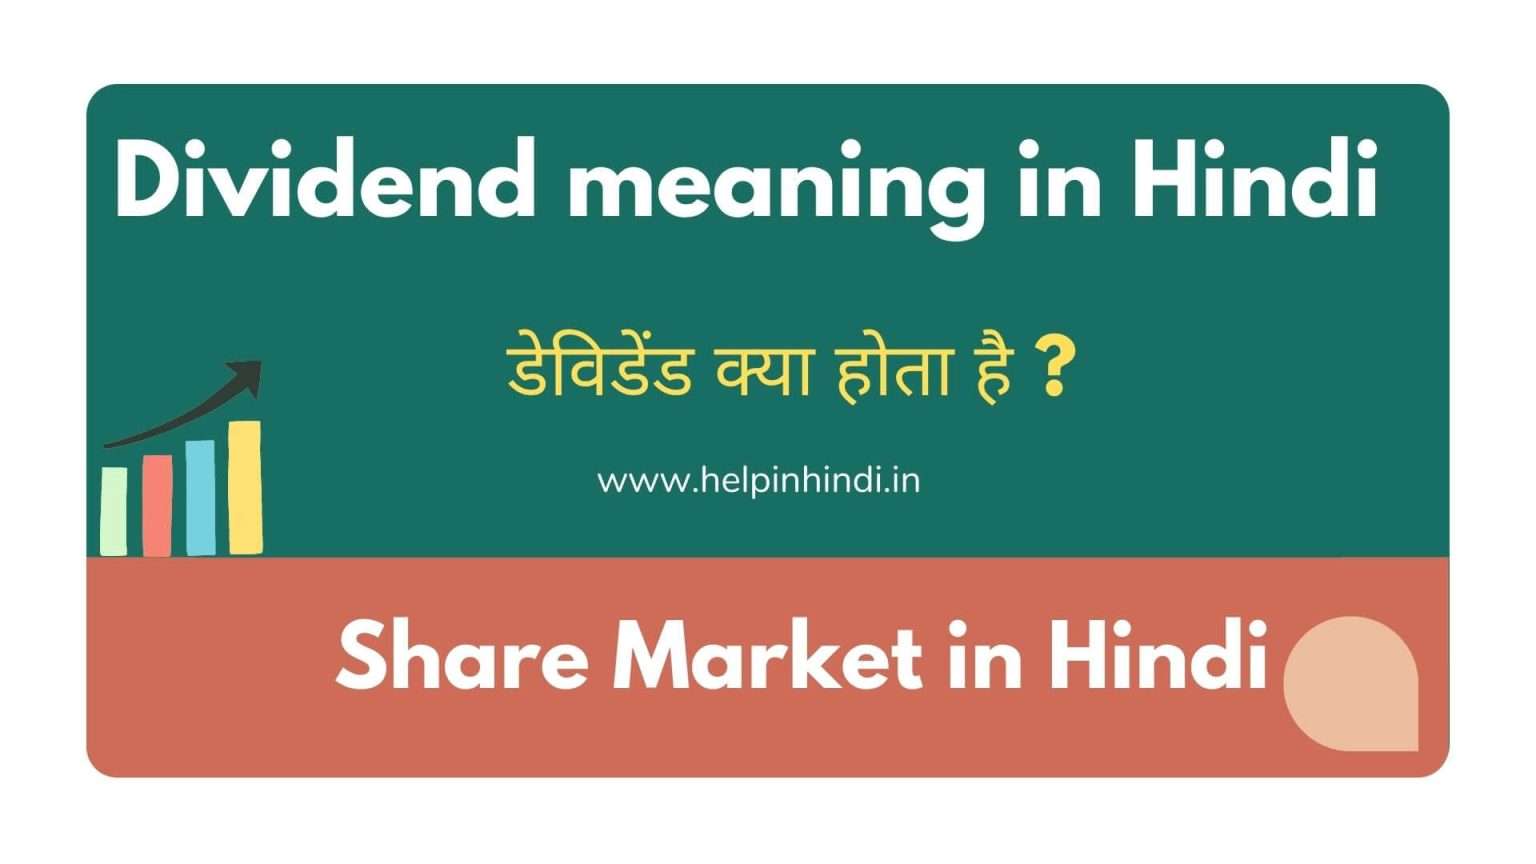 Strikes Meaning In Hindi